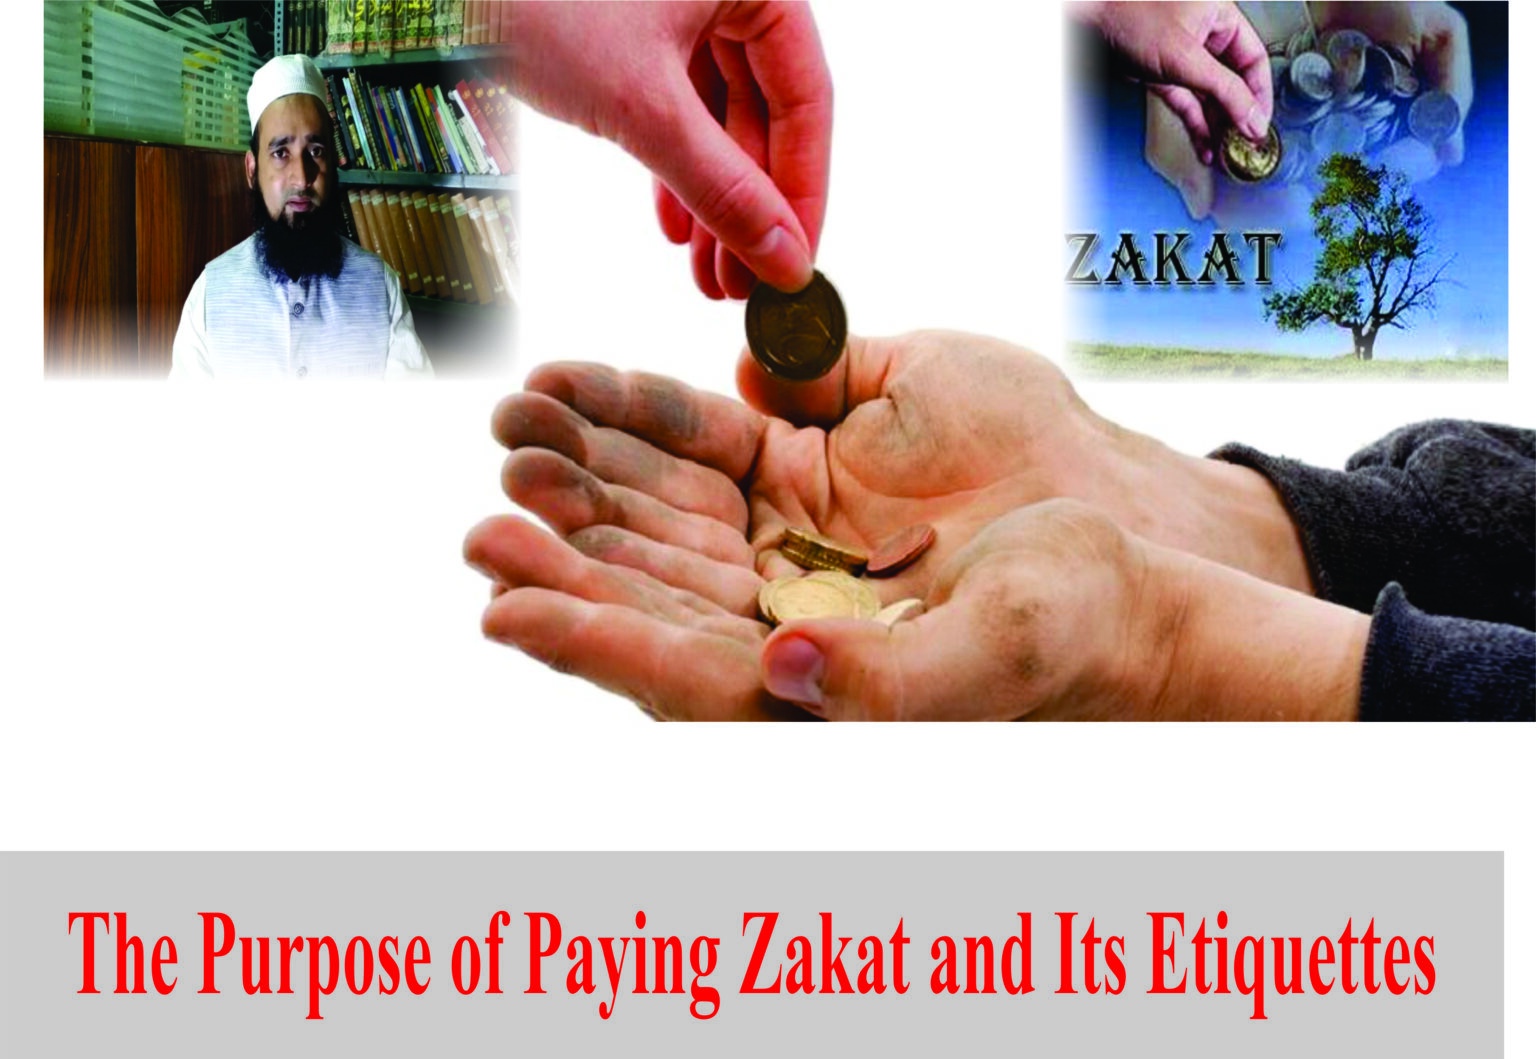 The Purpose of Paying Zakat and Its Etiquettes